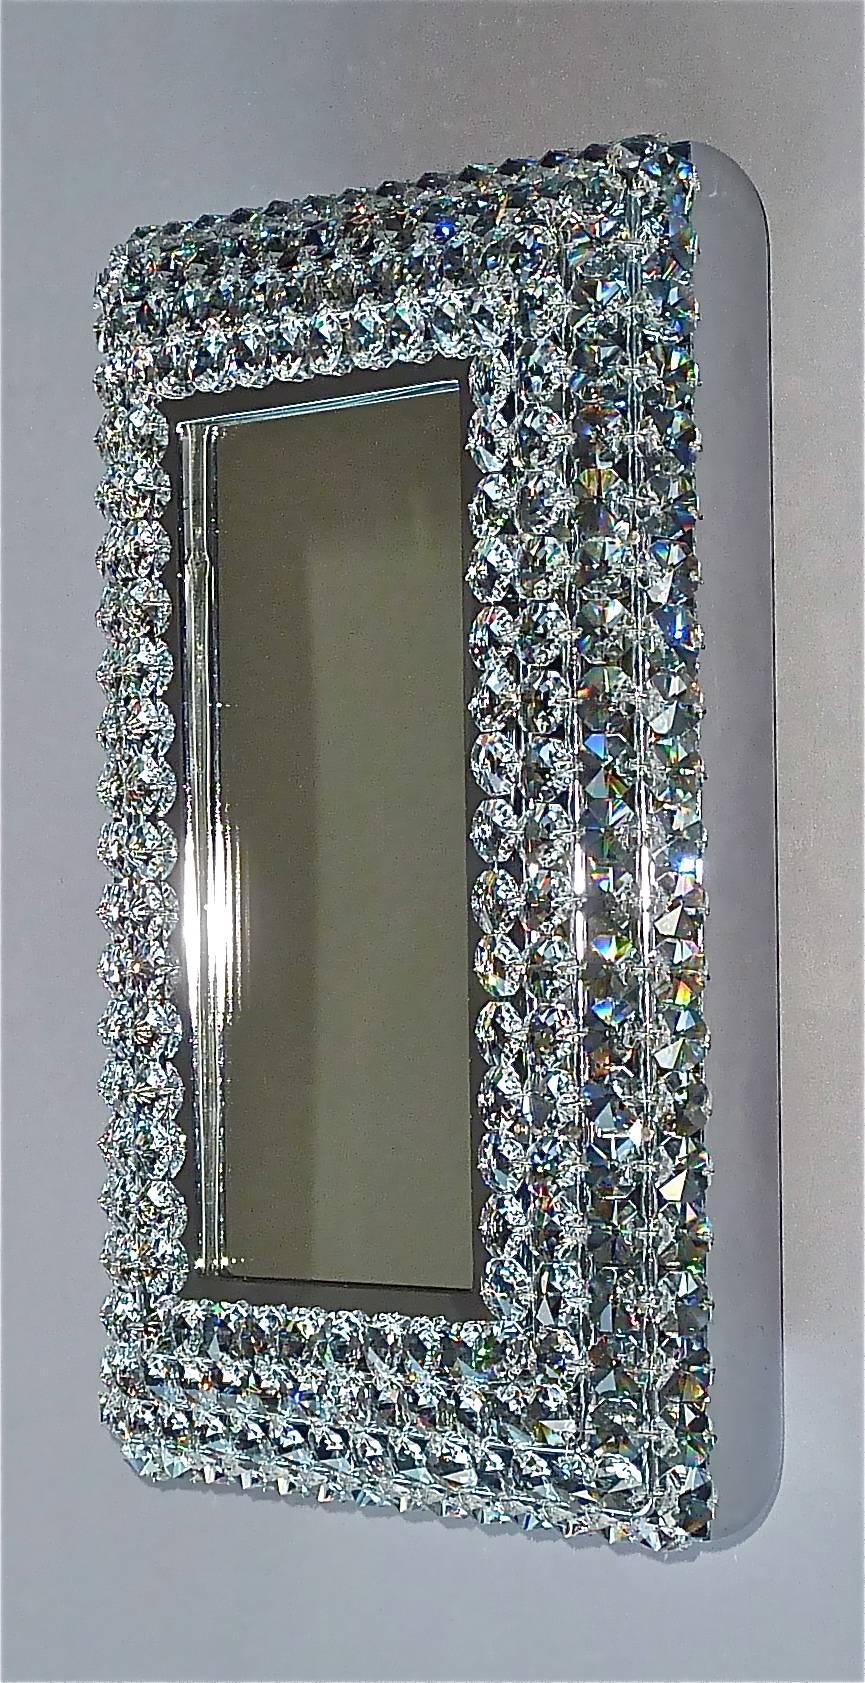 Beautiful petite chrome brass metal crystal glass backlit wall mirror made by Palwa, Germany, circa 1960-1970, documented in the Palwa sales catalog and signed at the back with Palwa company label with model number. The frame has lots of beautiful